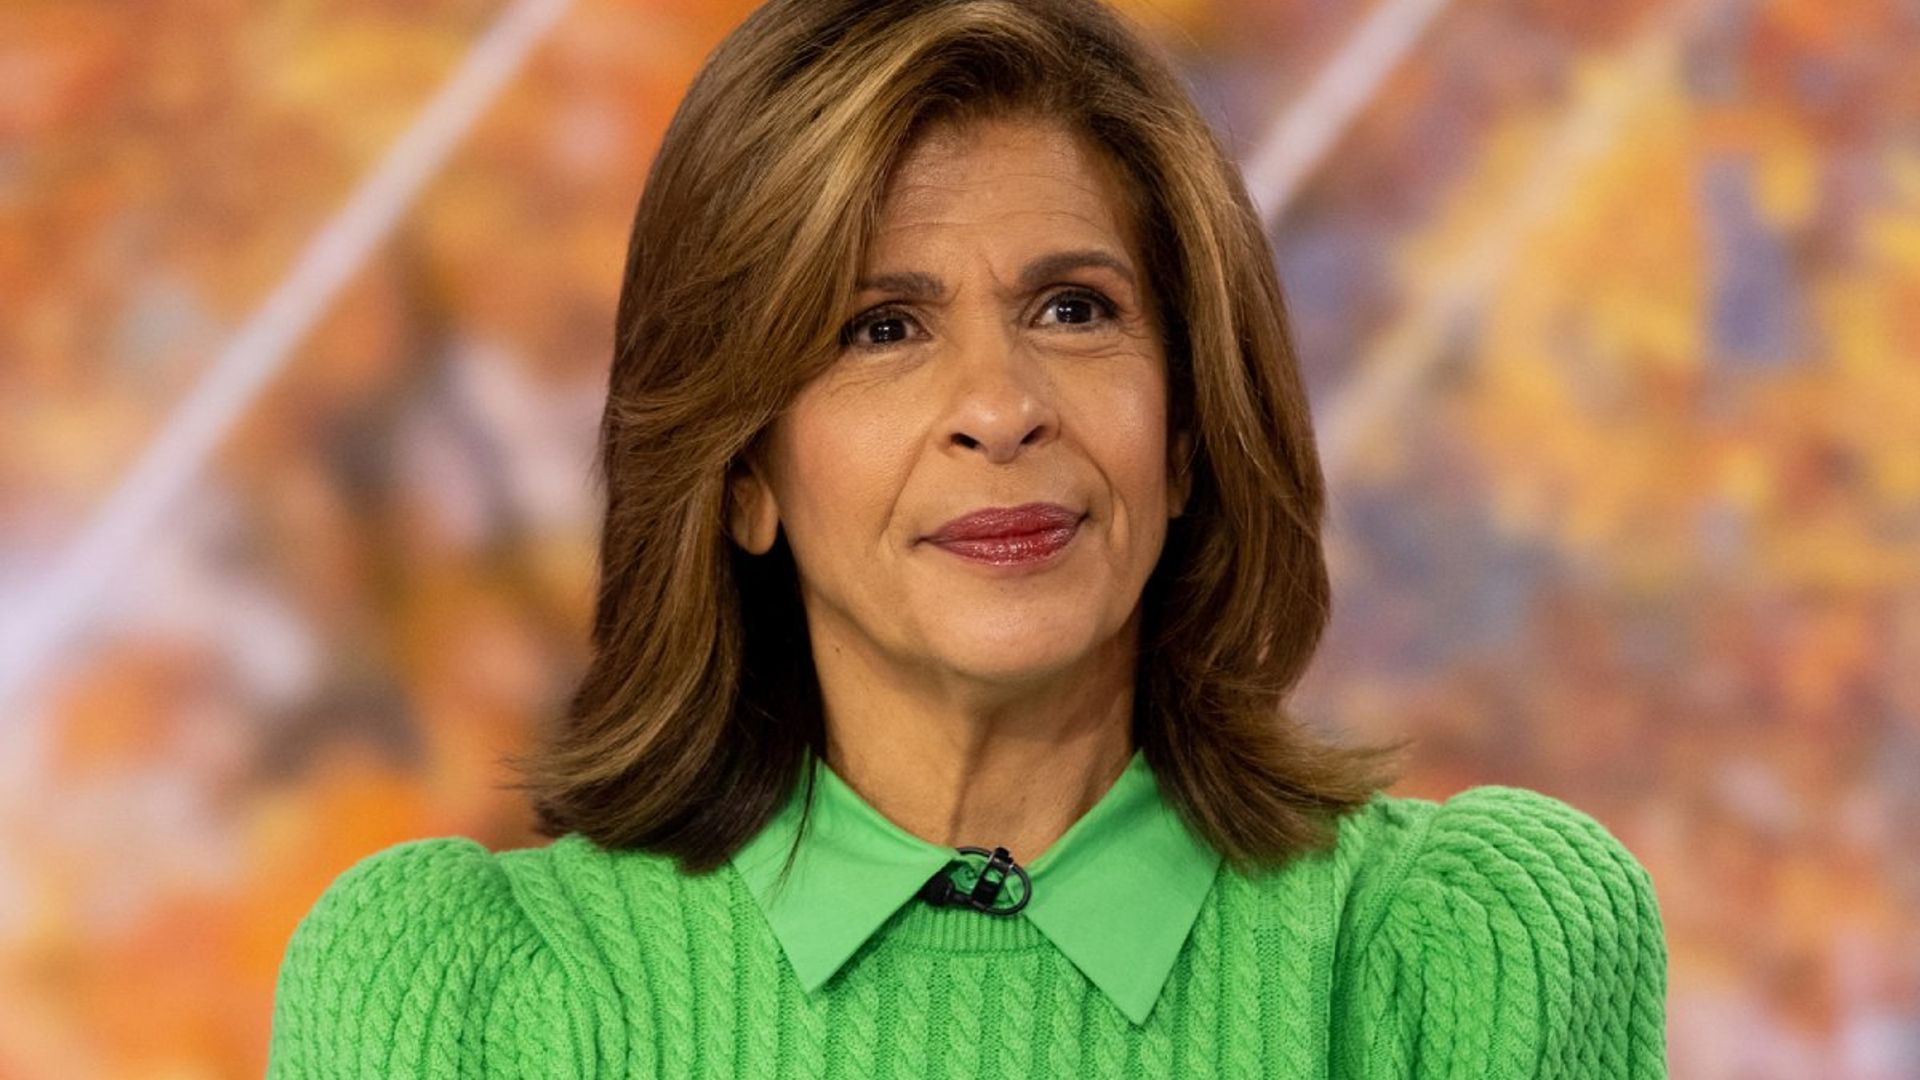 Hoda Kotb congratulated as she shares exciting career update